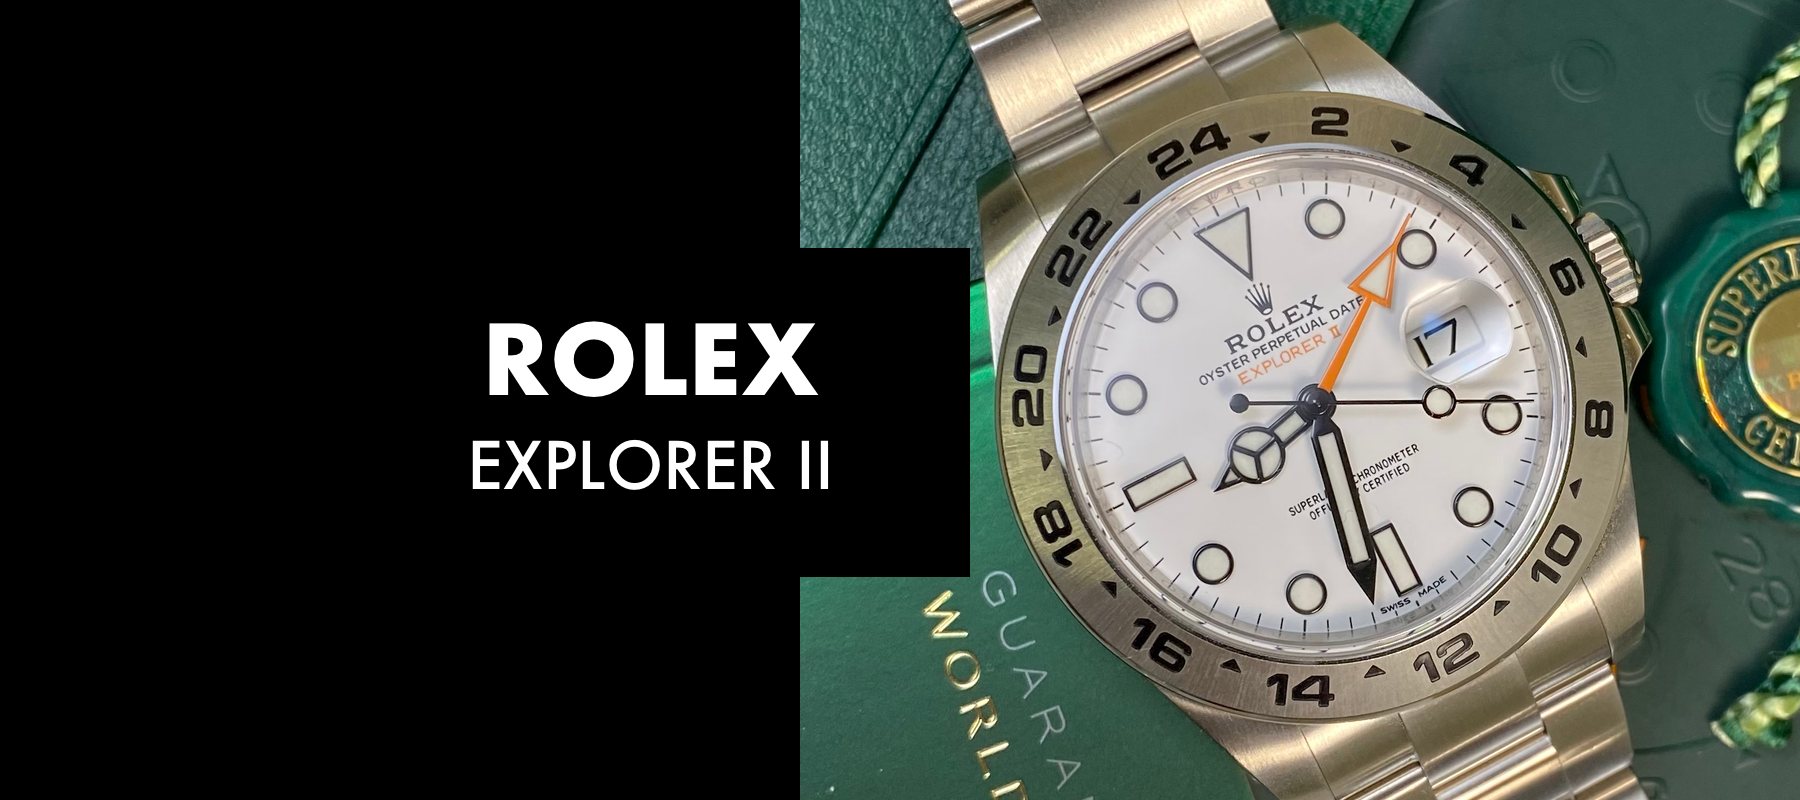 Top Most & Iconic Rolex Watches of All